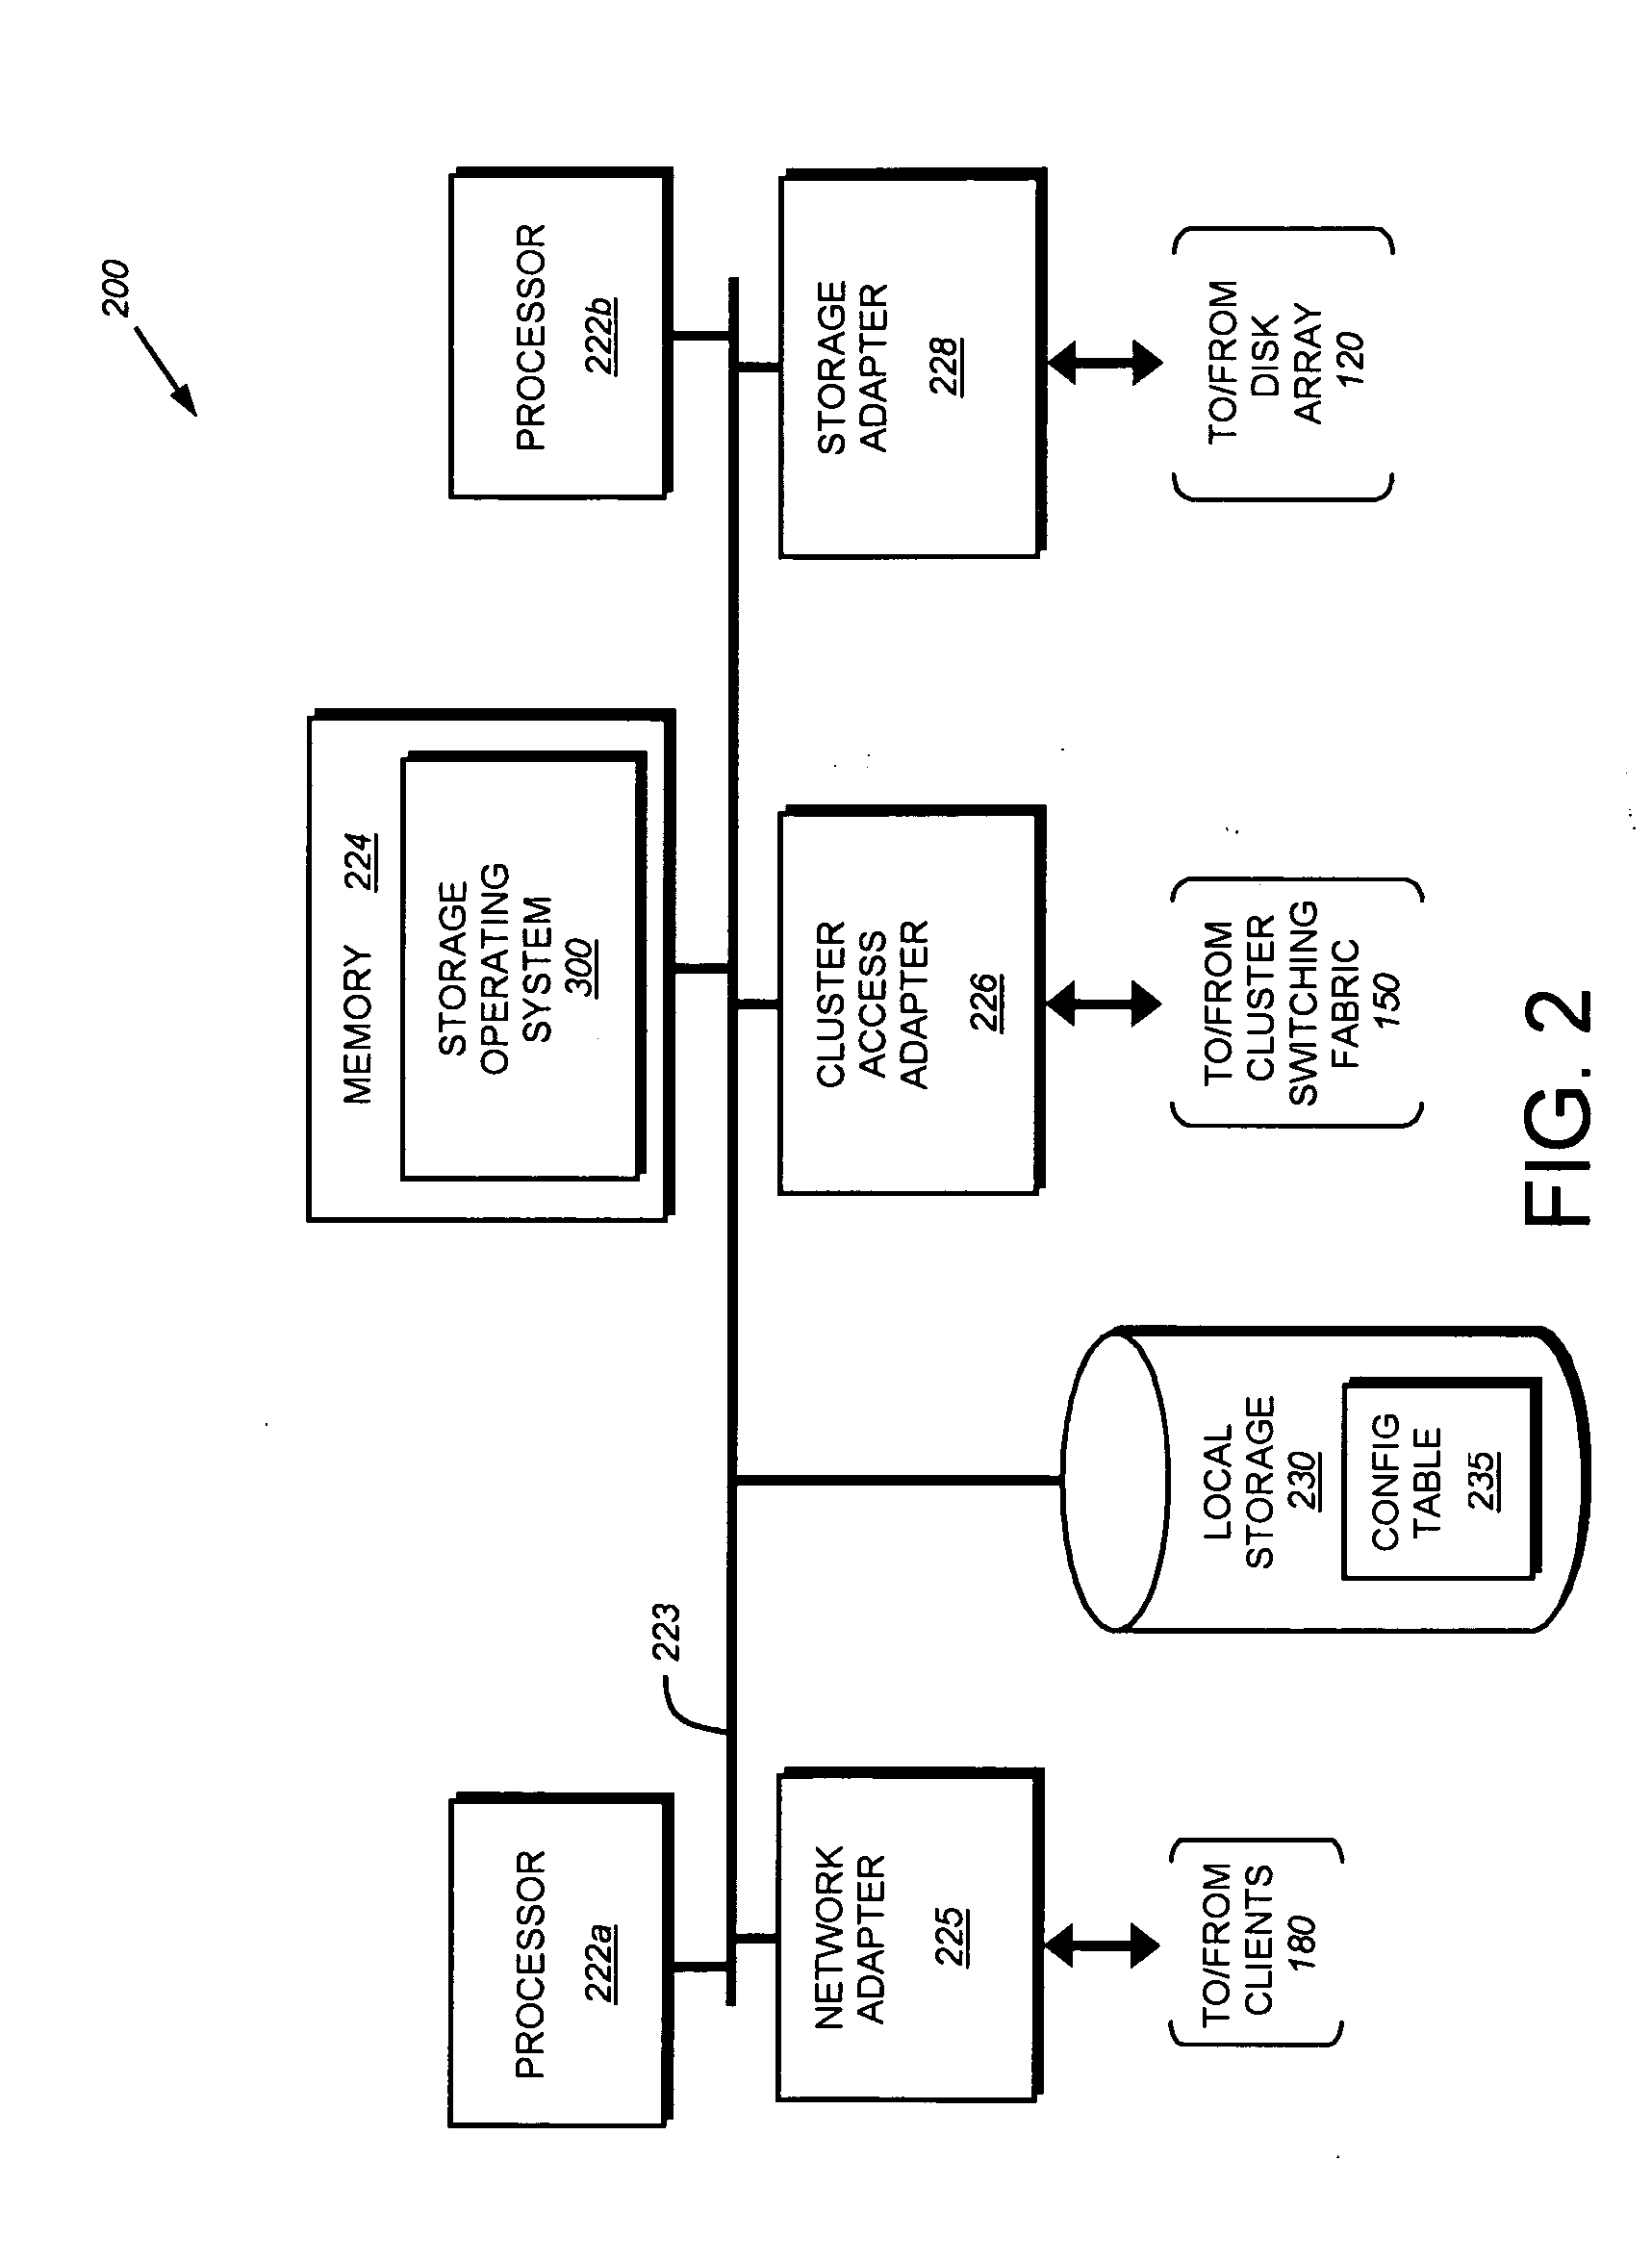 Storage system architecture for striping data container content across volumes of a cluster